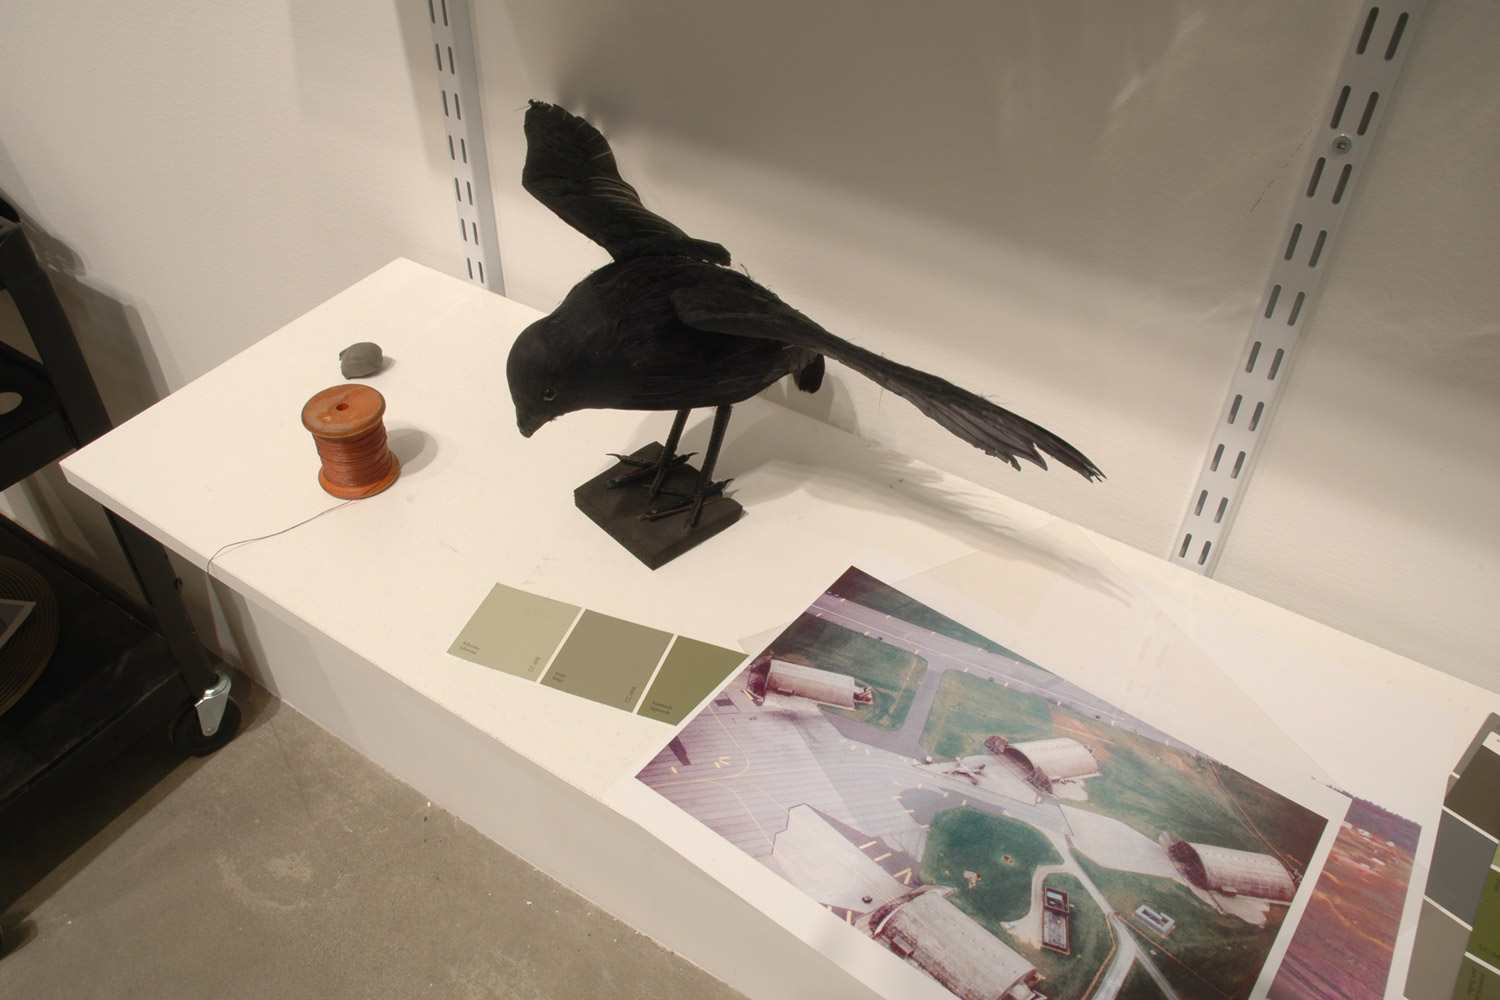 Crow with Spool of Thread
